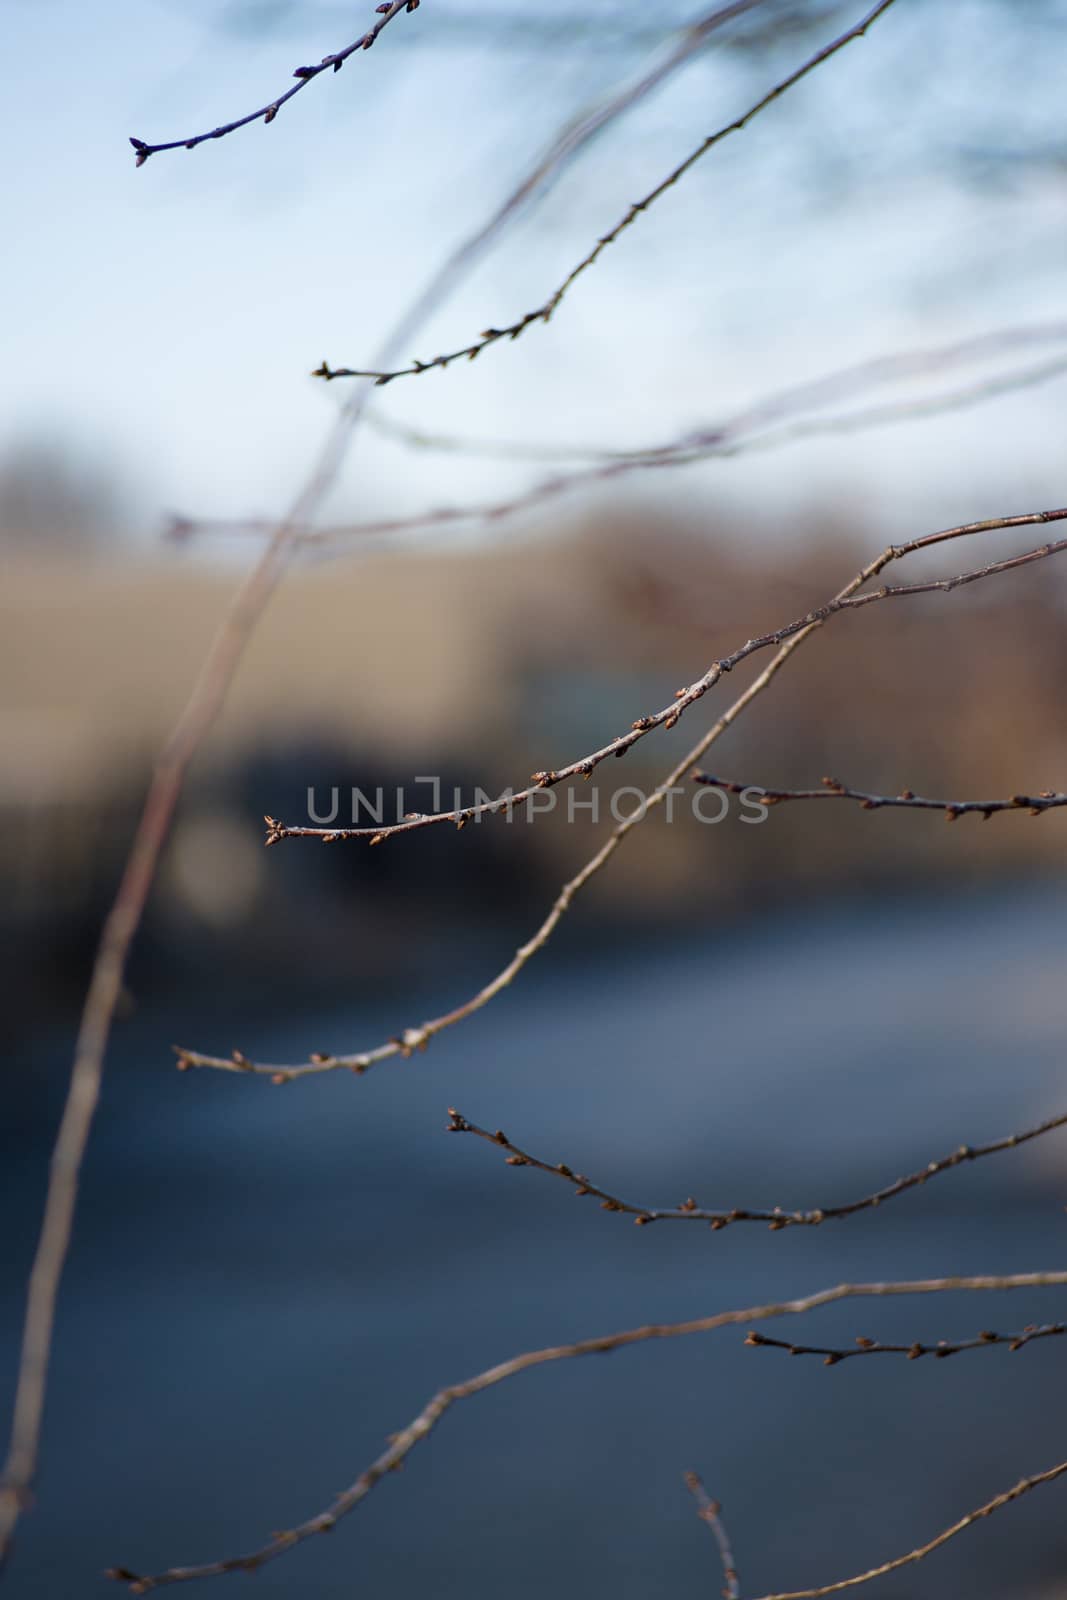 thin twig on a blurred background of the river